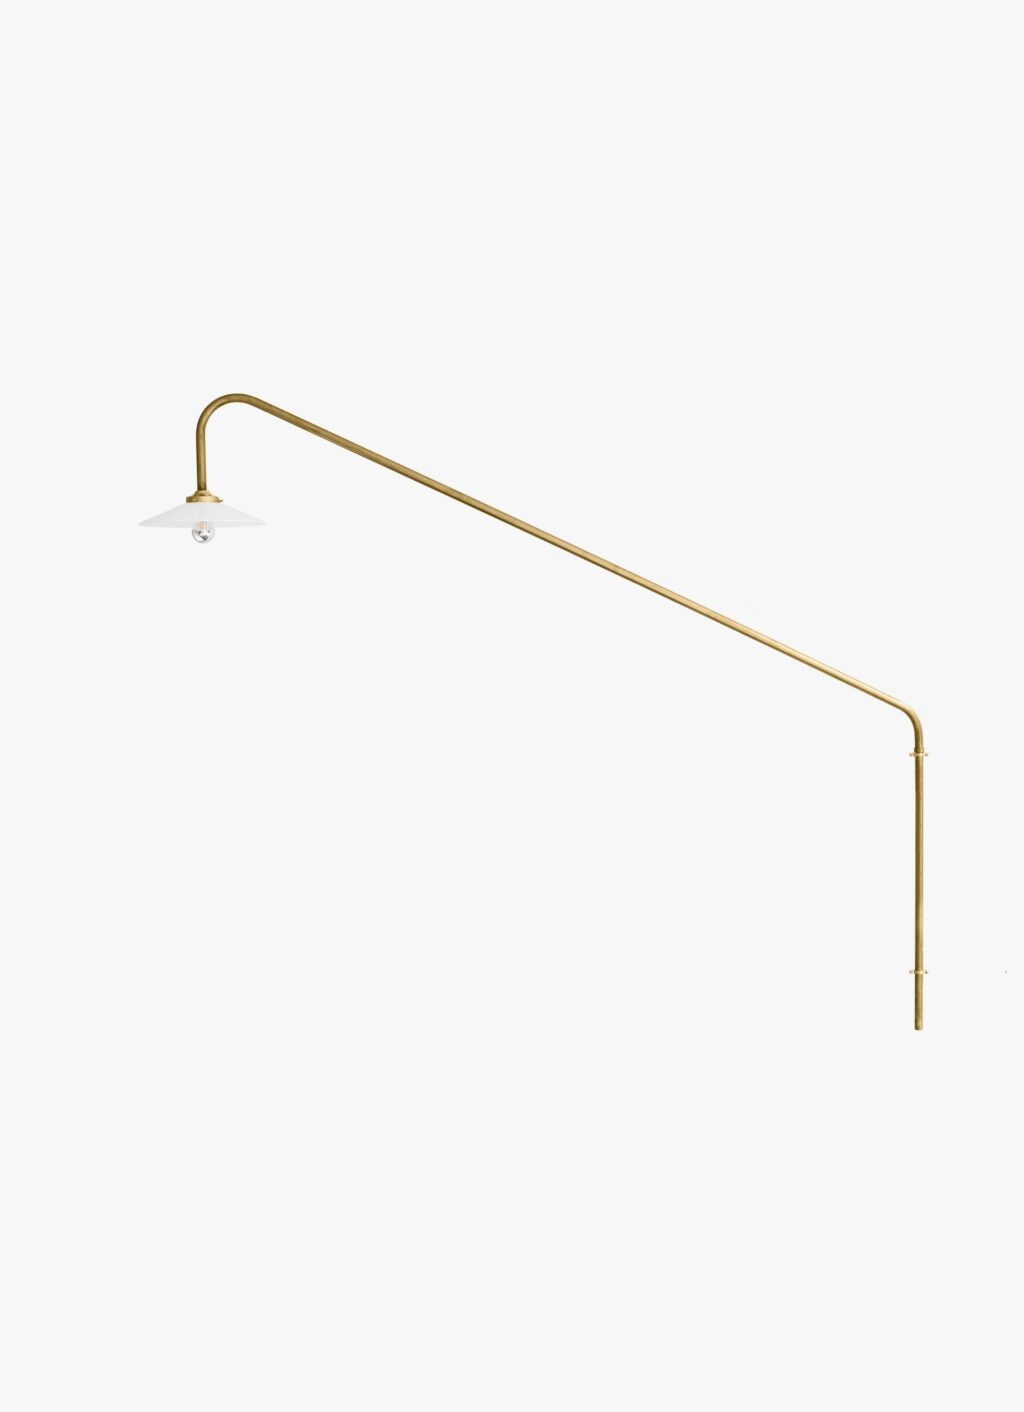 Valerie Objects - Hanging Lamp - No1 - brass